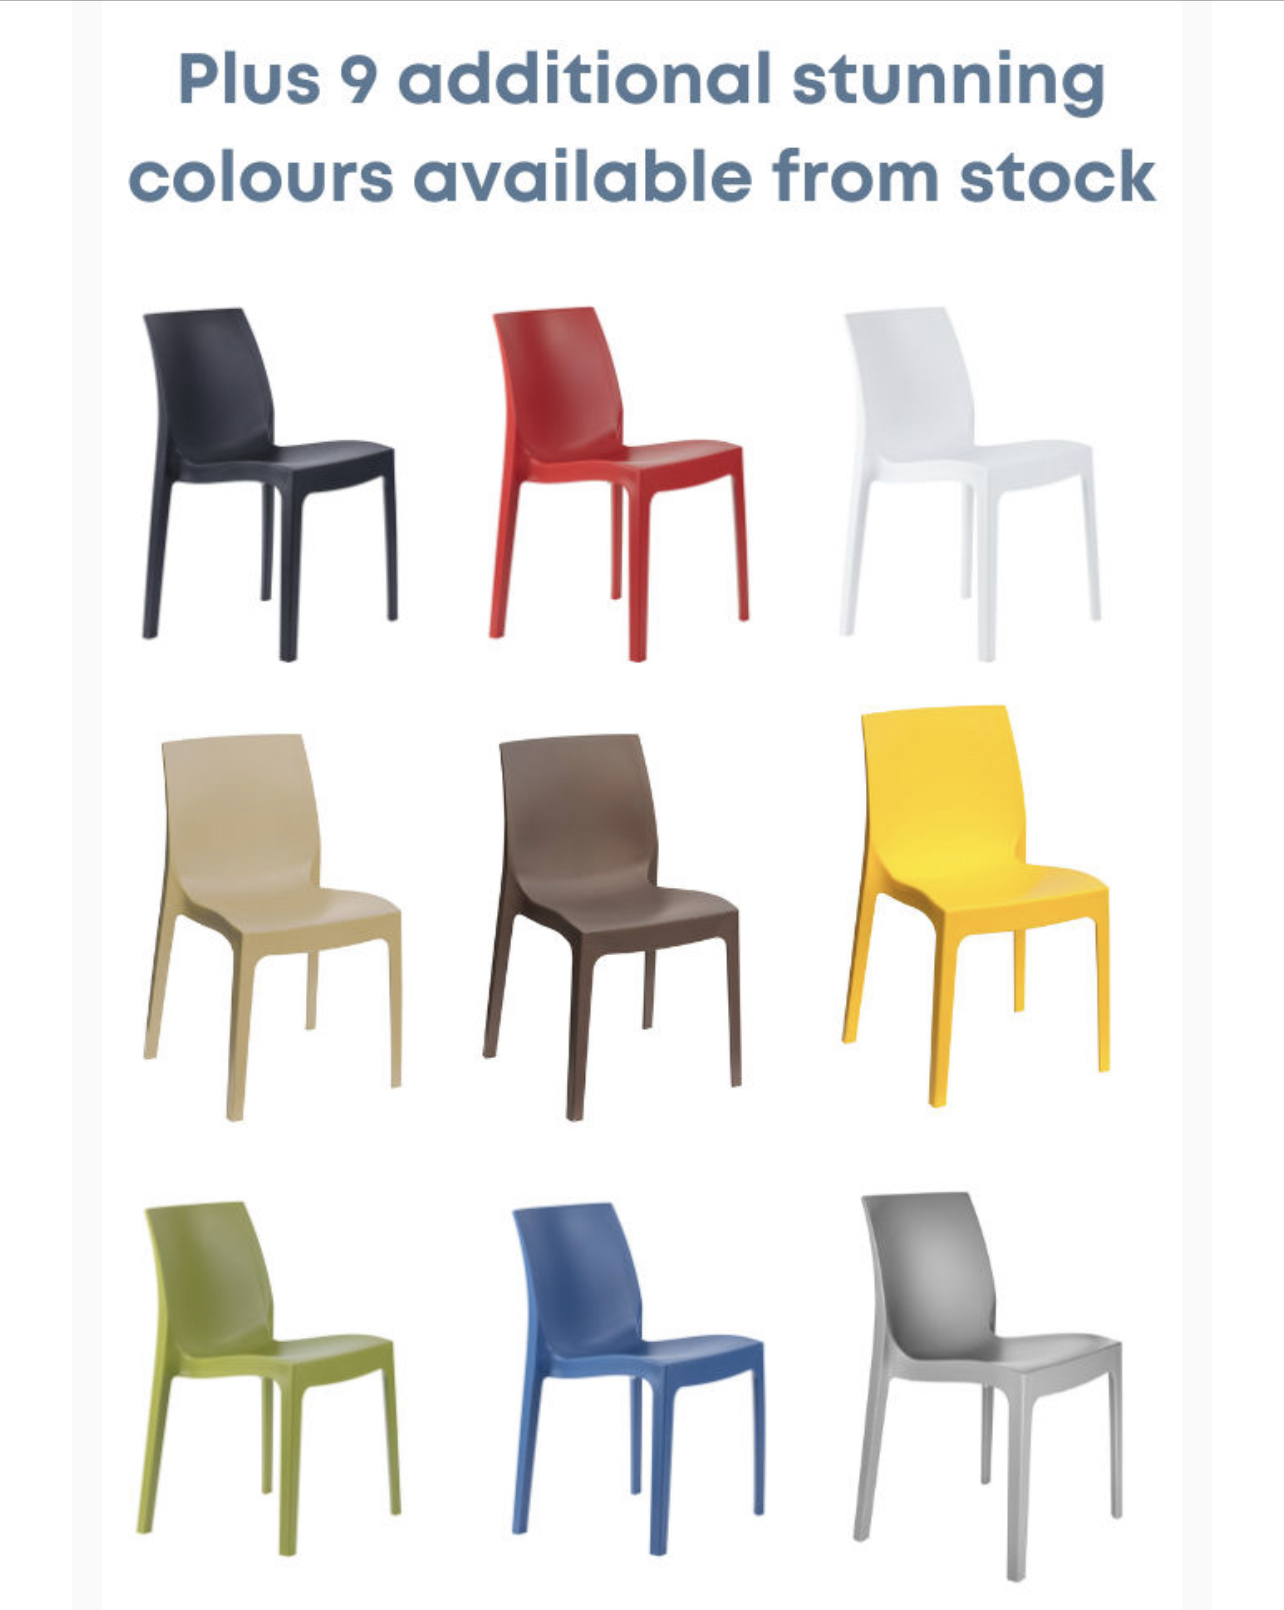 Strata Indoor or Outdoor polypropylene chair stacks 8 high white stock colours